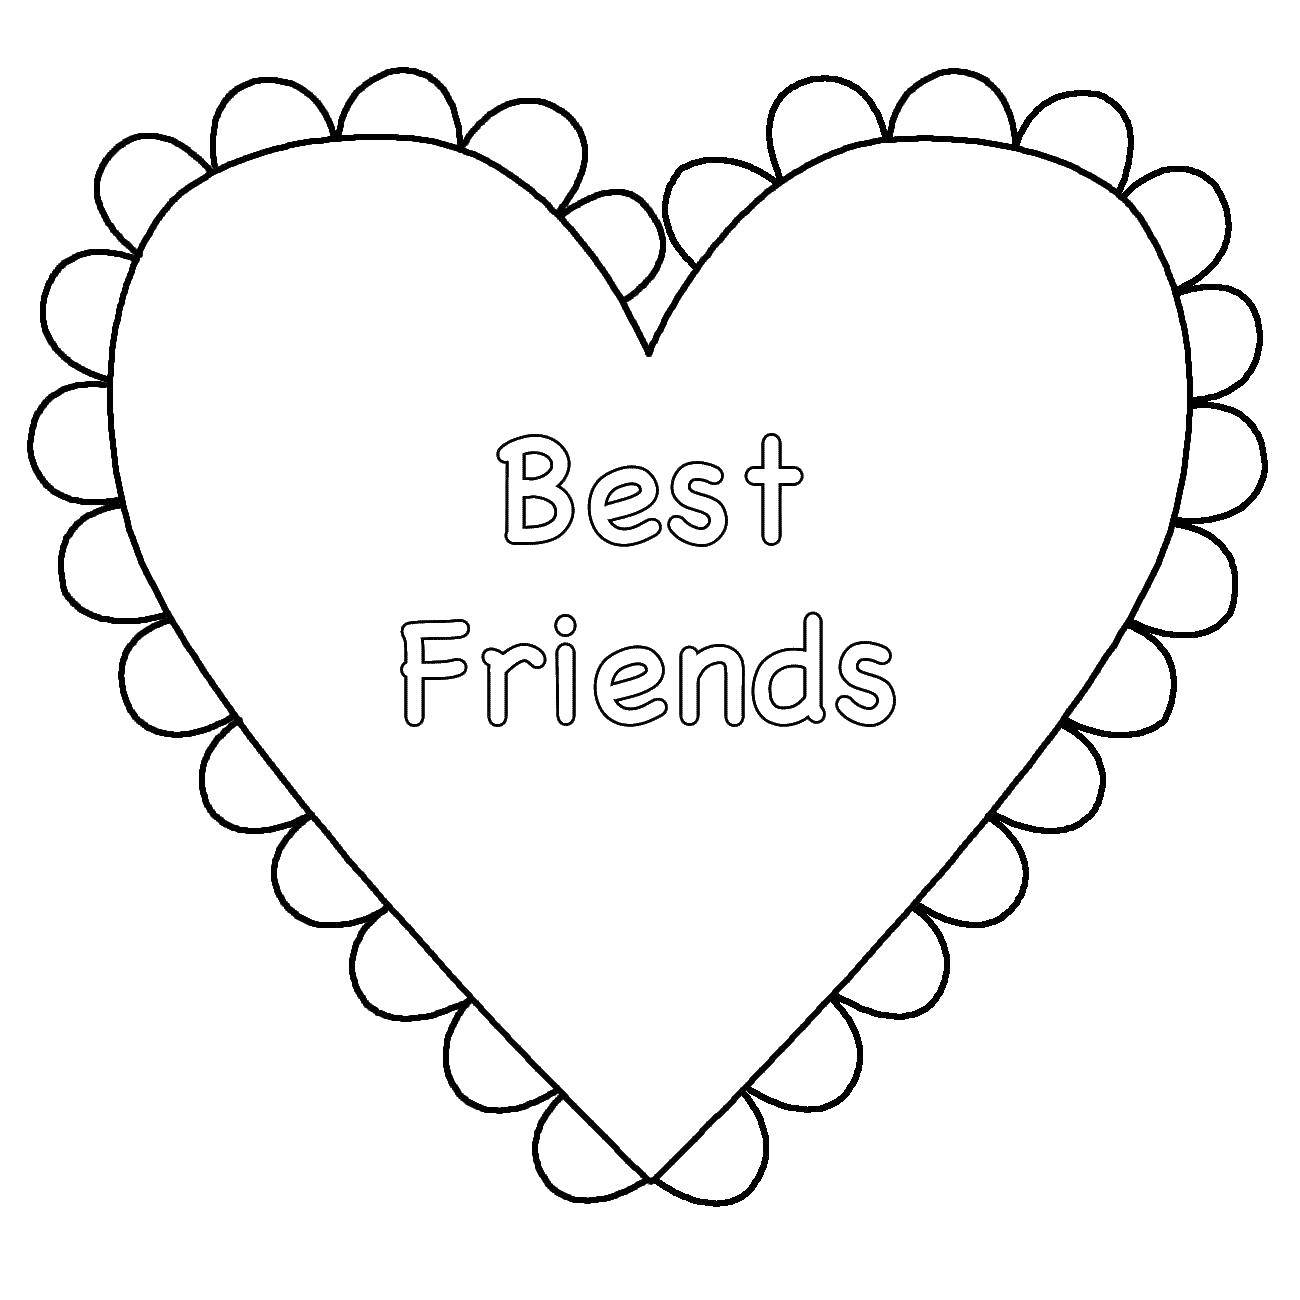 Coloring Best friends. Category Hearts. Tags:  form, heart, love, best friends.